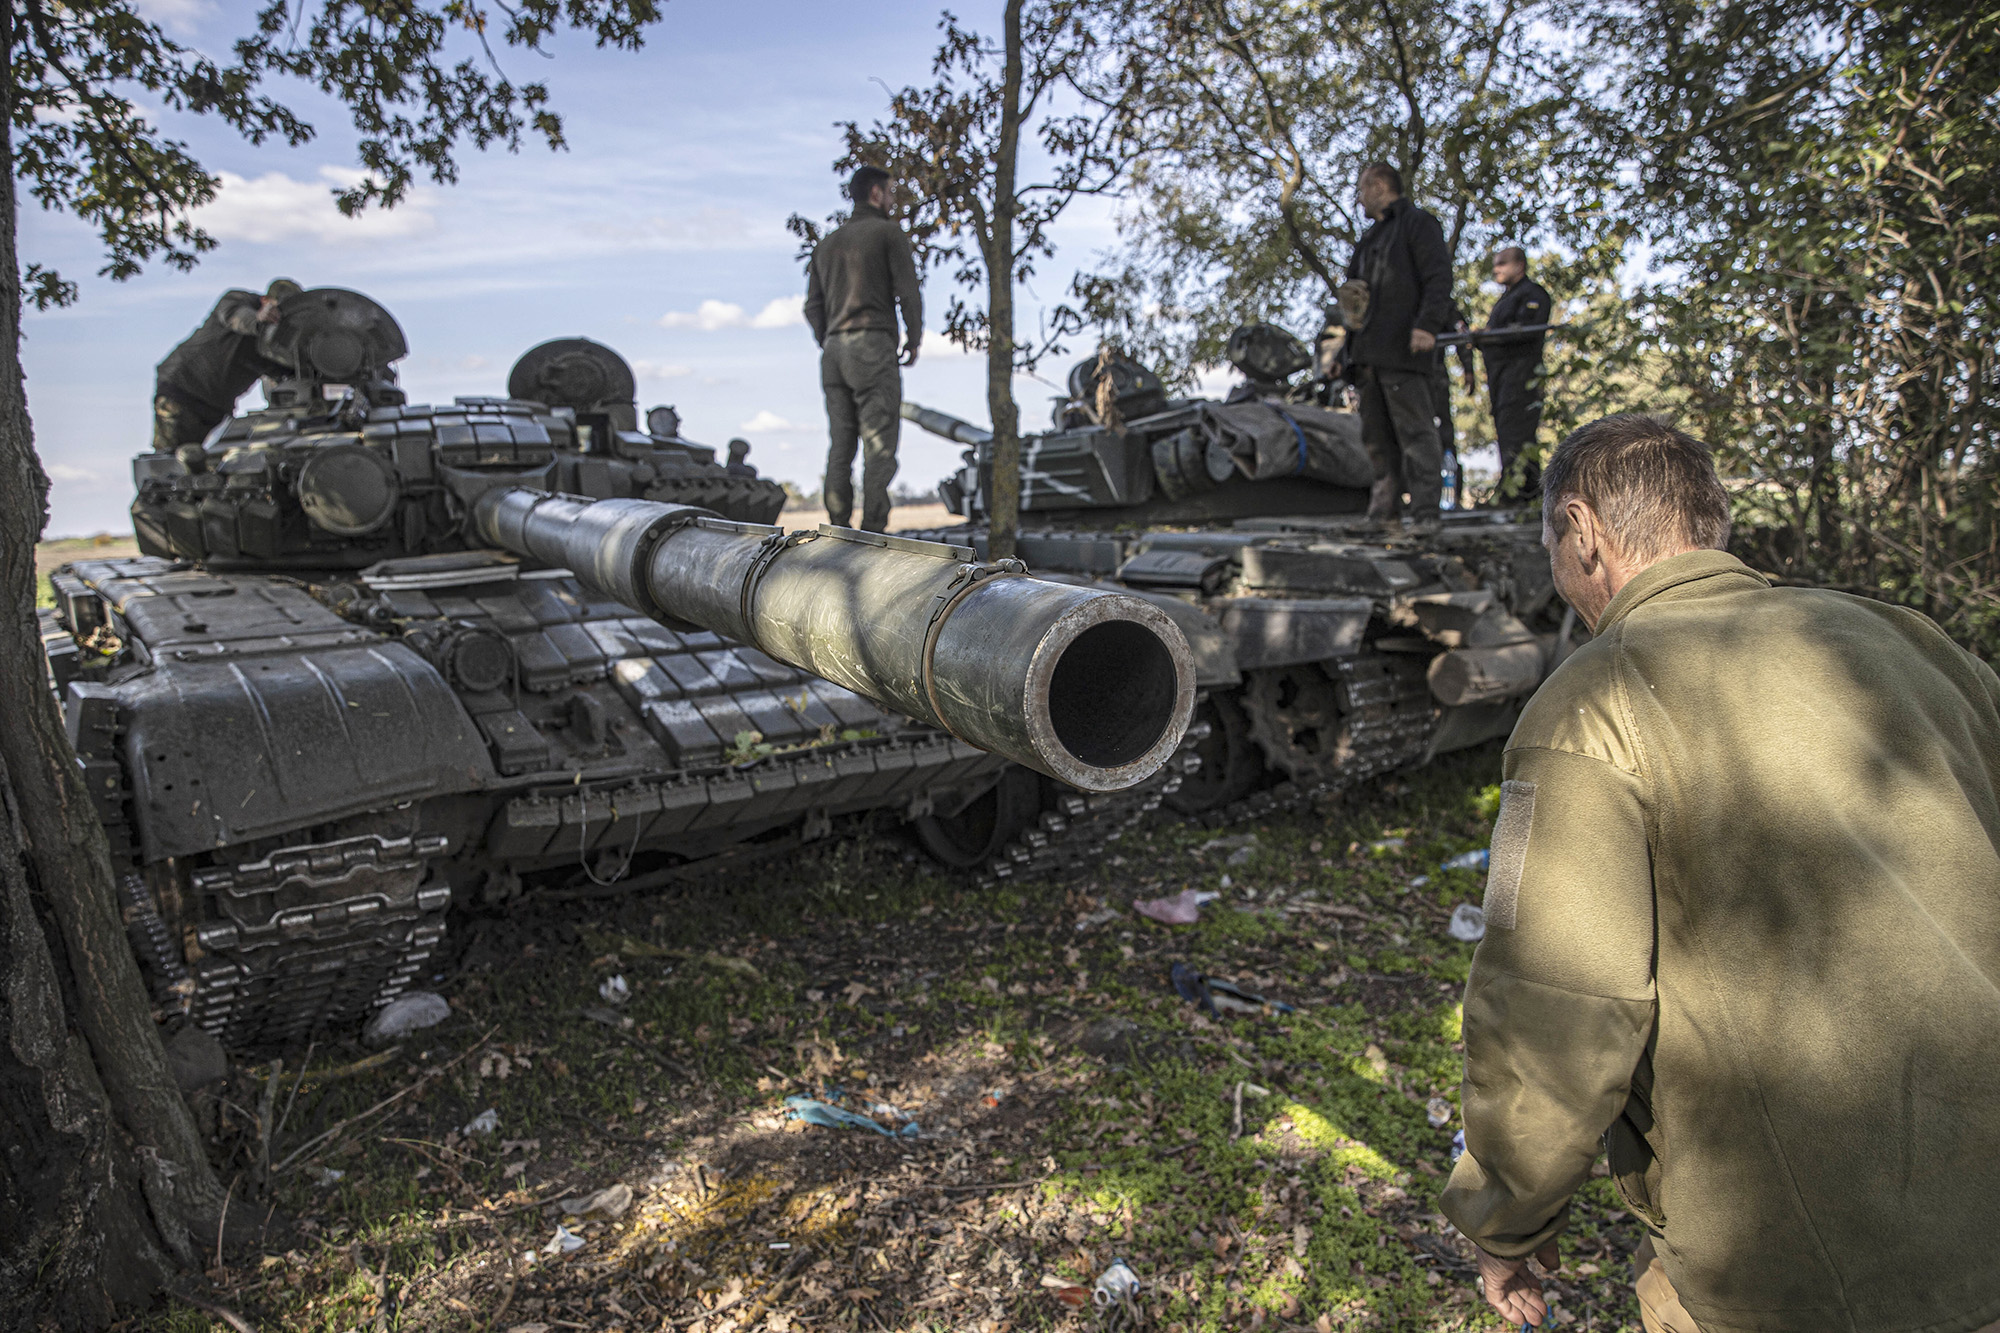 Ukrainian soldiers patrol counterattack against Russian forces in the southern Kherson region, Ukraine, on October 7.